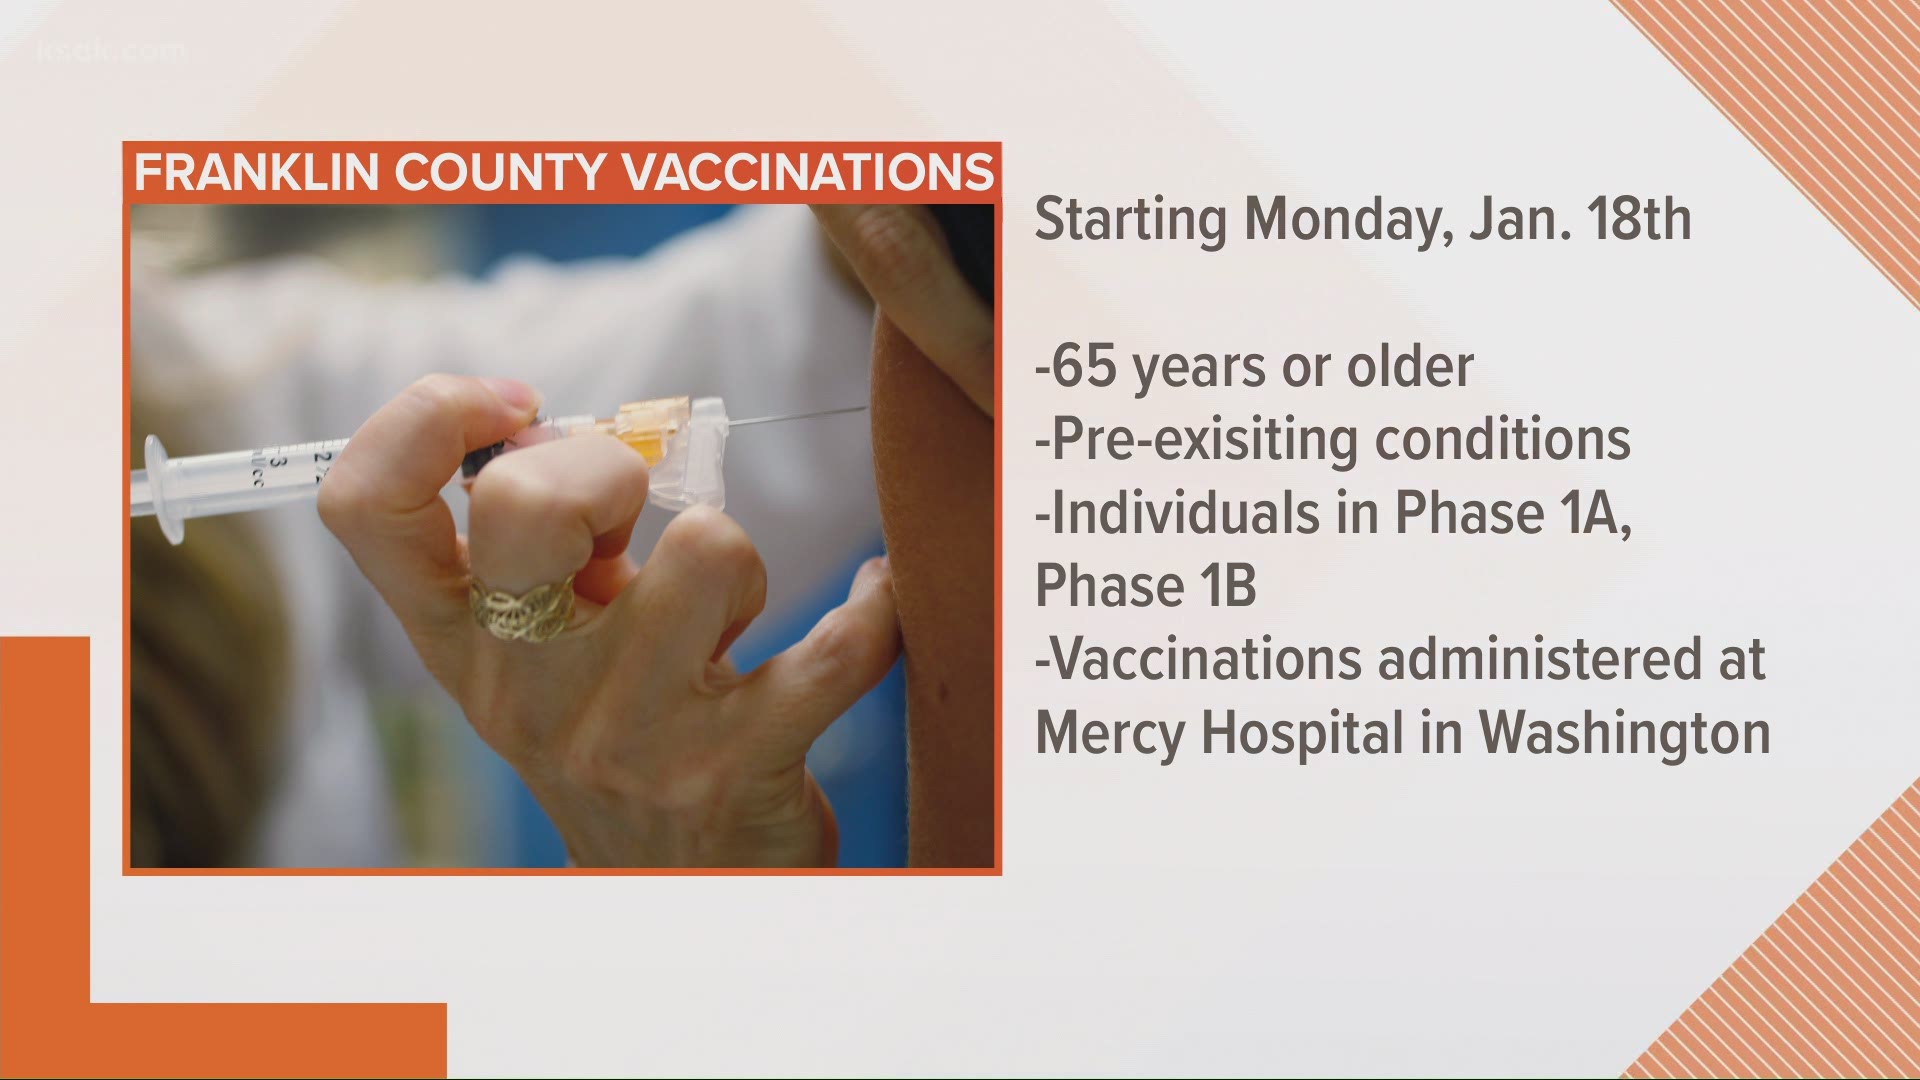 People who live in Franklin County will be able to get their Covid-19 vaccinations starting on Monday